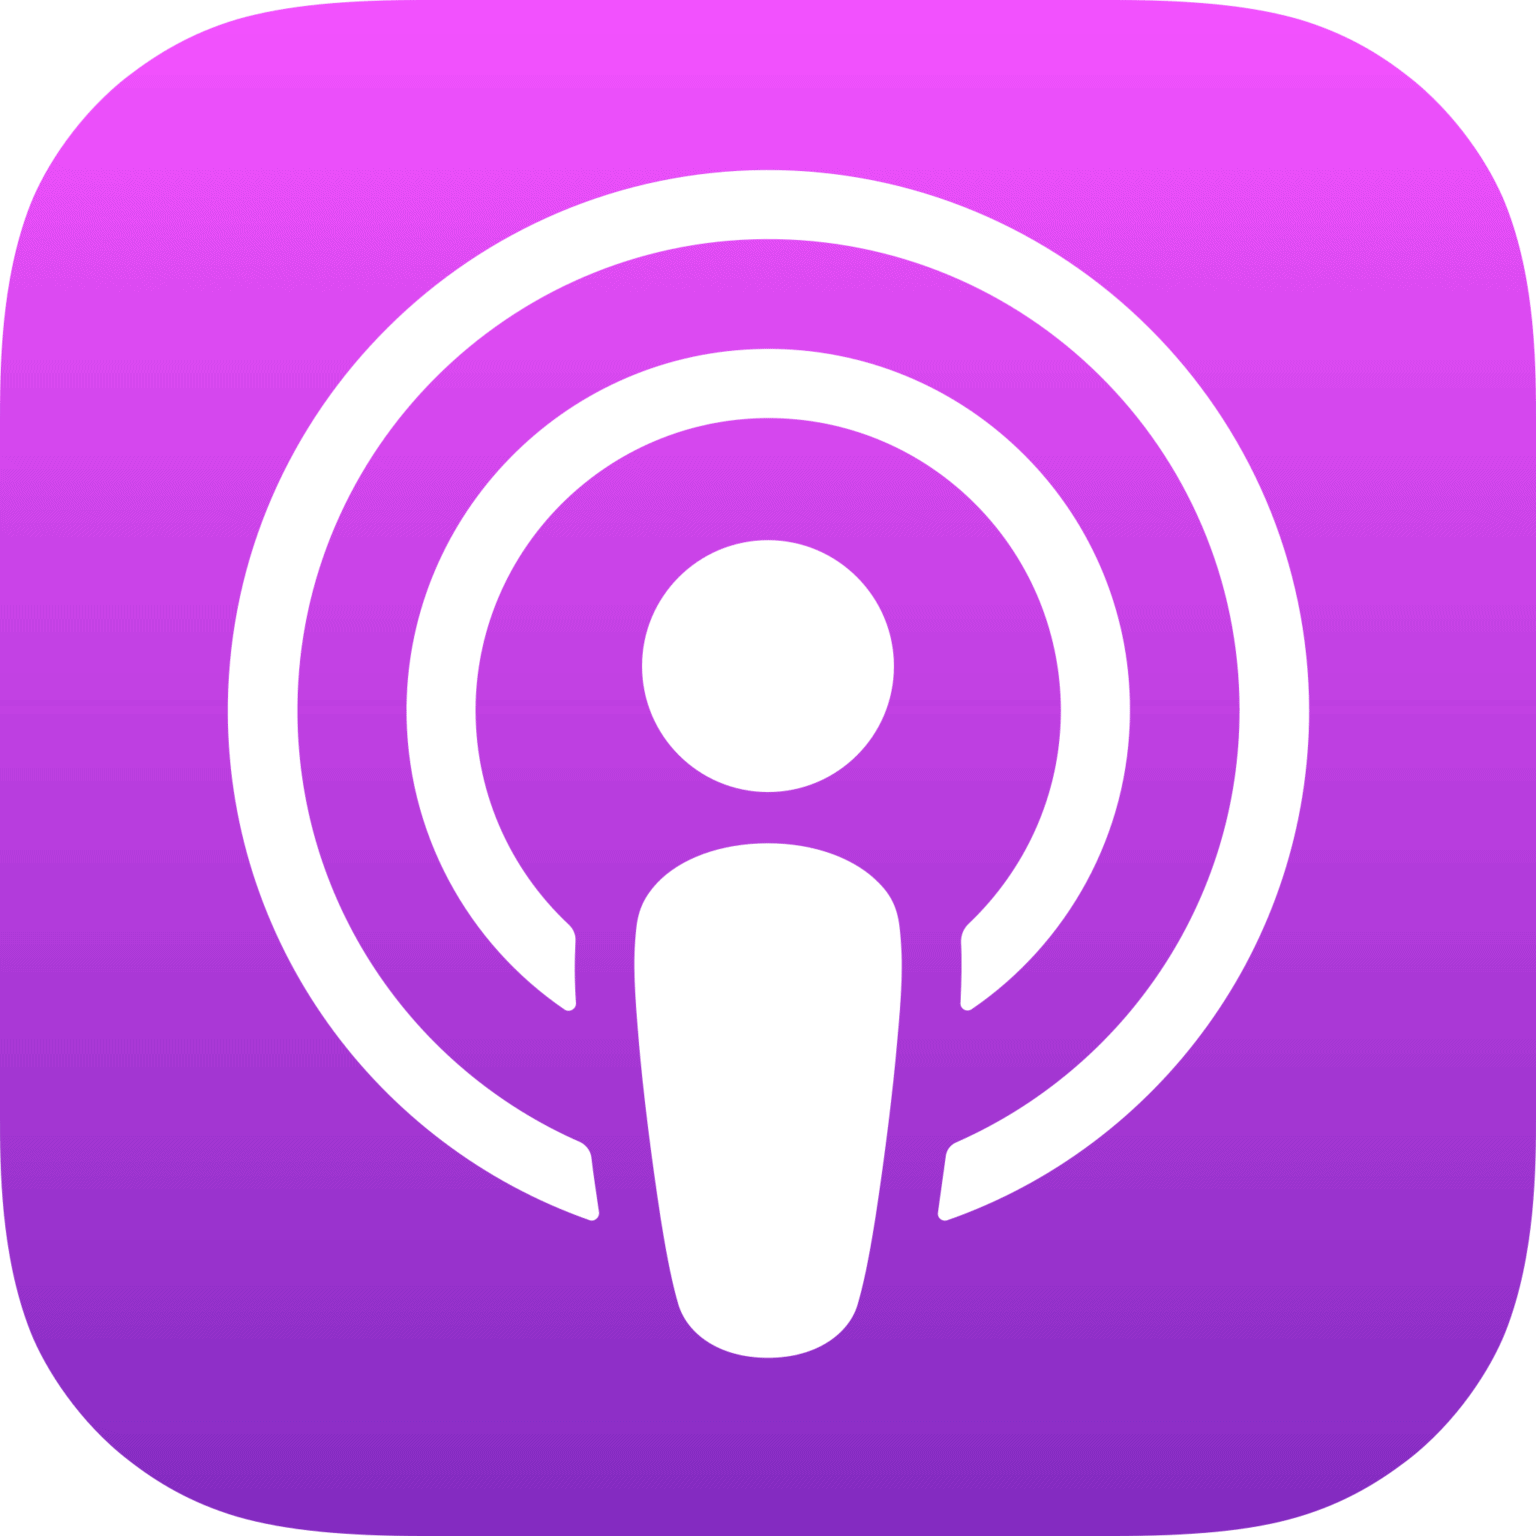 Creators of Apple podcasts will soon be able to access metrics about their followers.